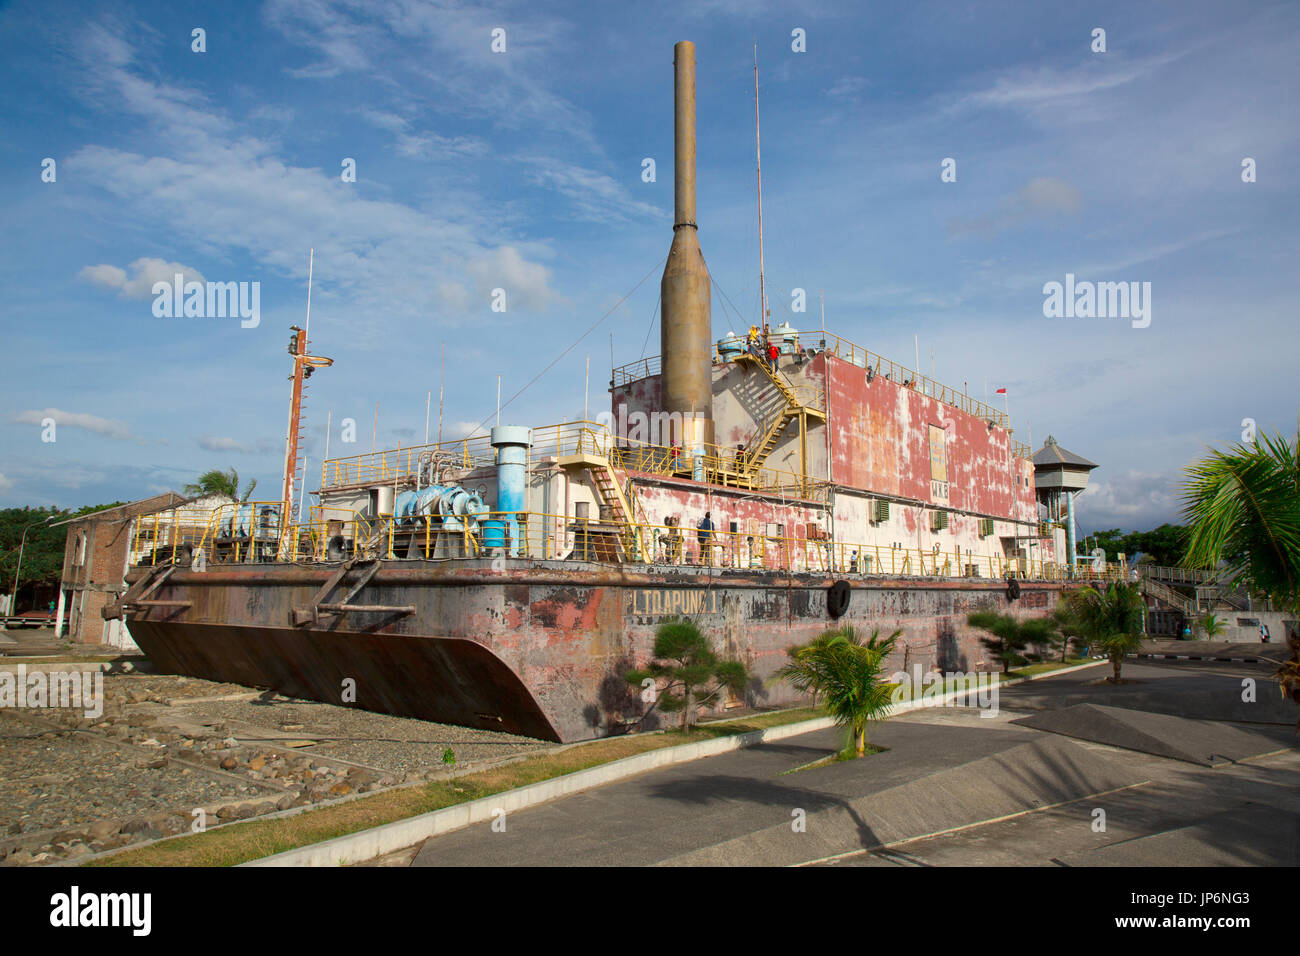 People explore the Apung electrical generator ship, moved several kilometres inland by the 2004 tsunami in Banda Aceh, Indonesia Stock Photo